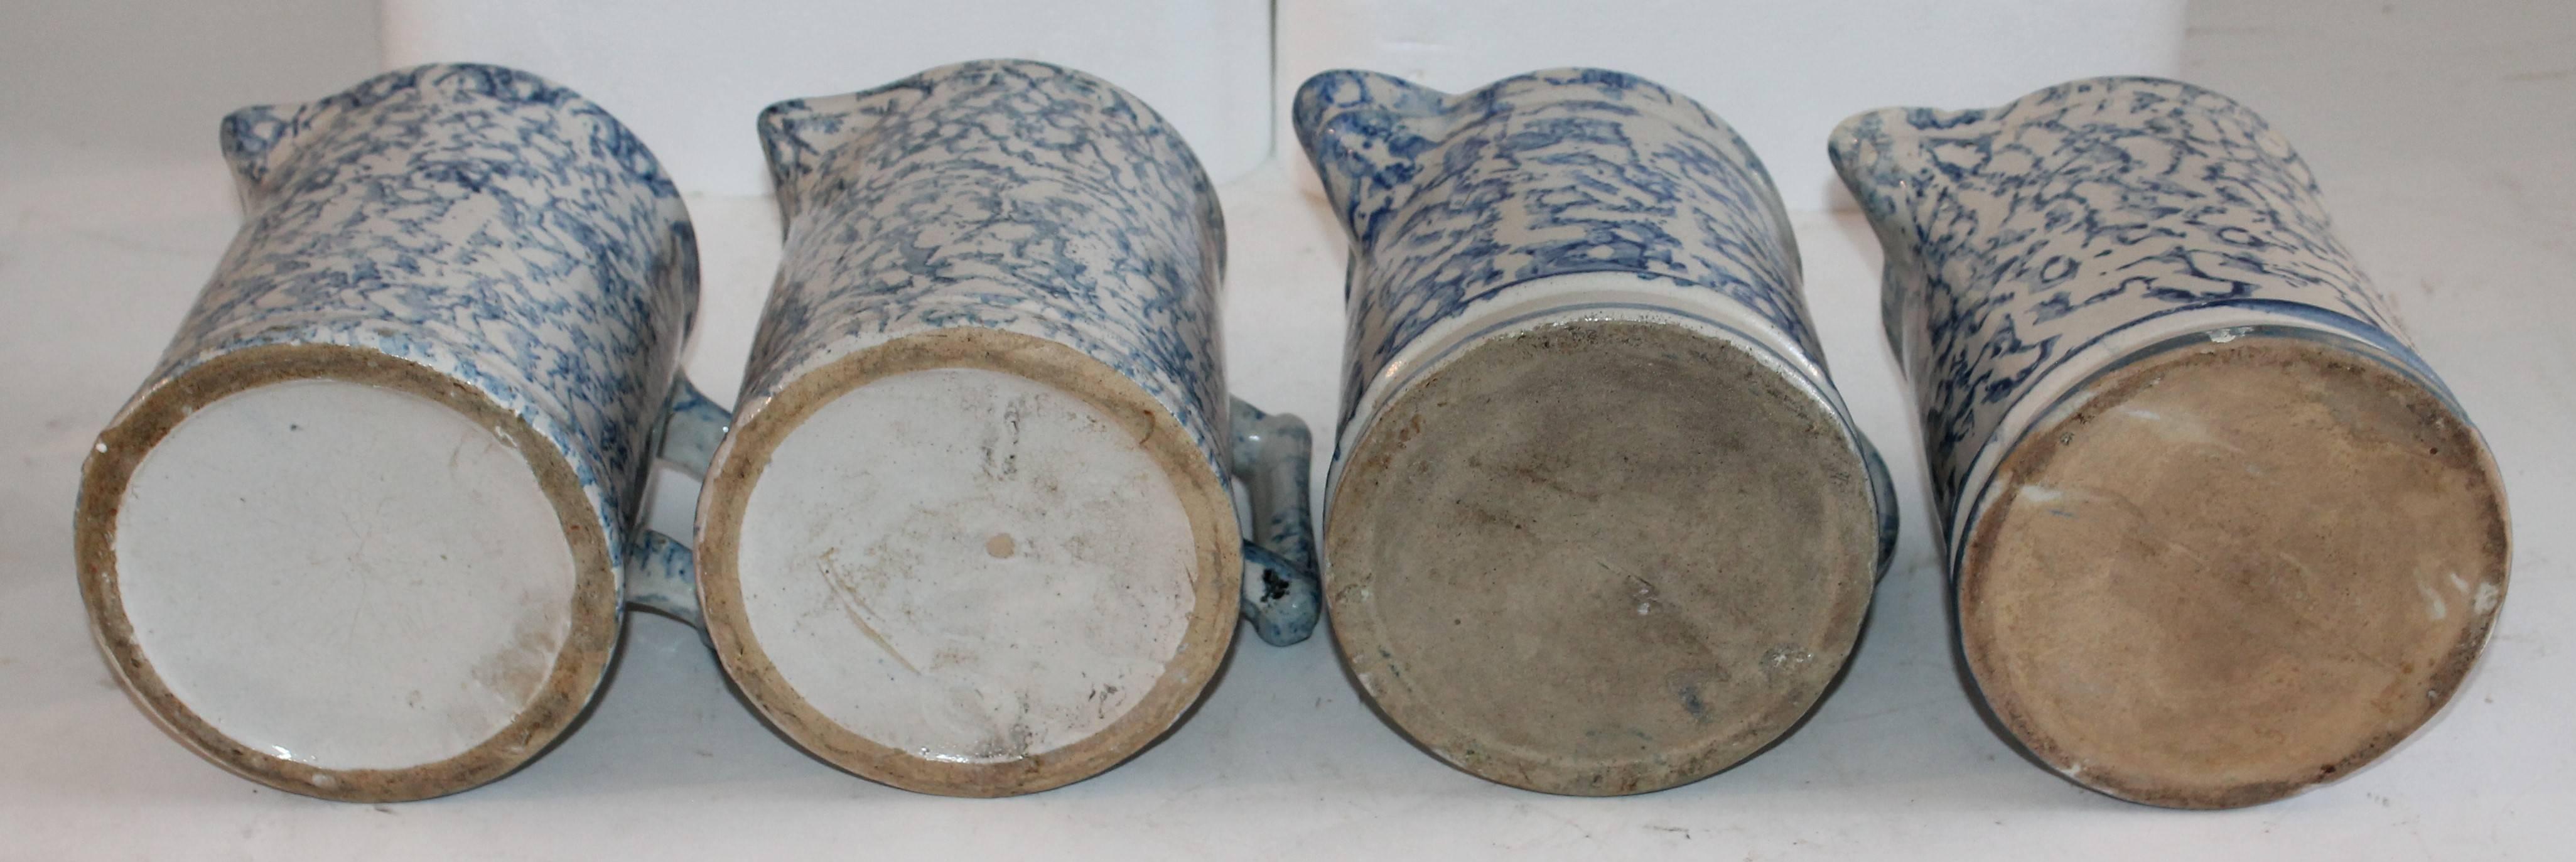 19th Century Sponge Ware Collection of Eight Pottery Pitchers 4